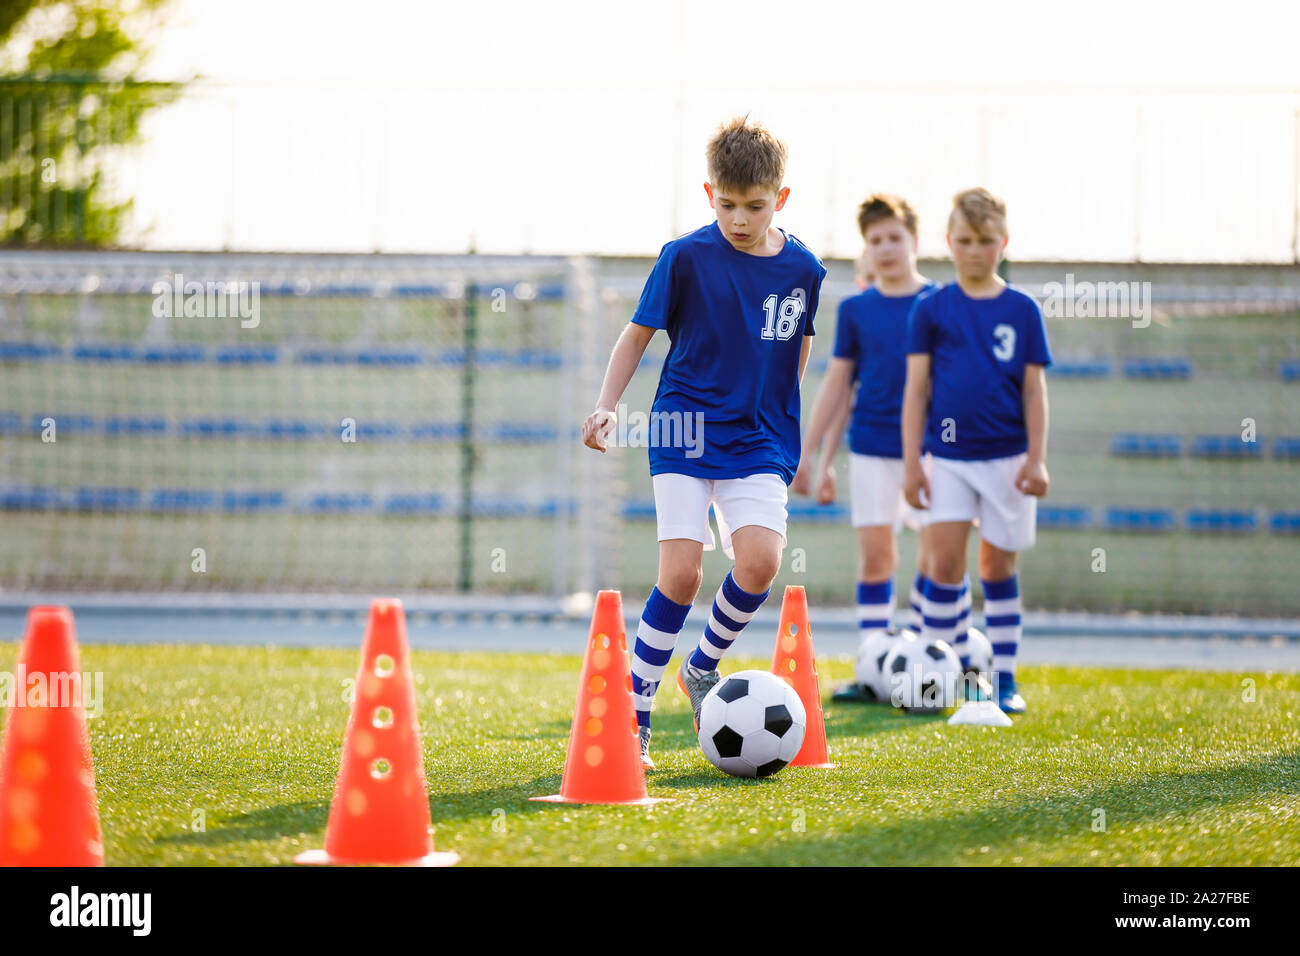 Group of football training cones on the soccer field Photos